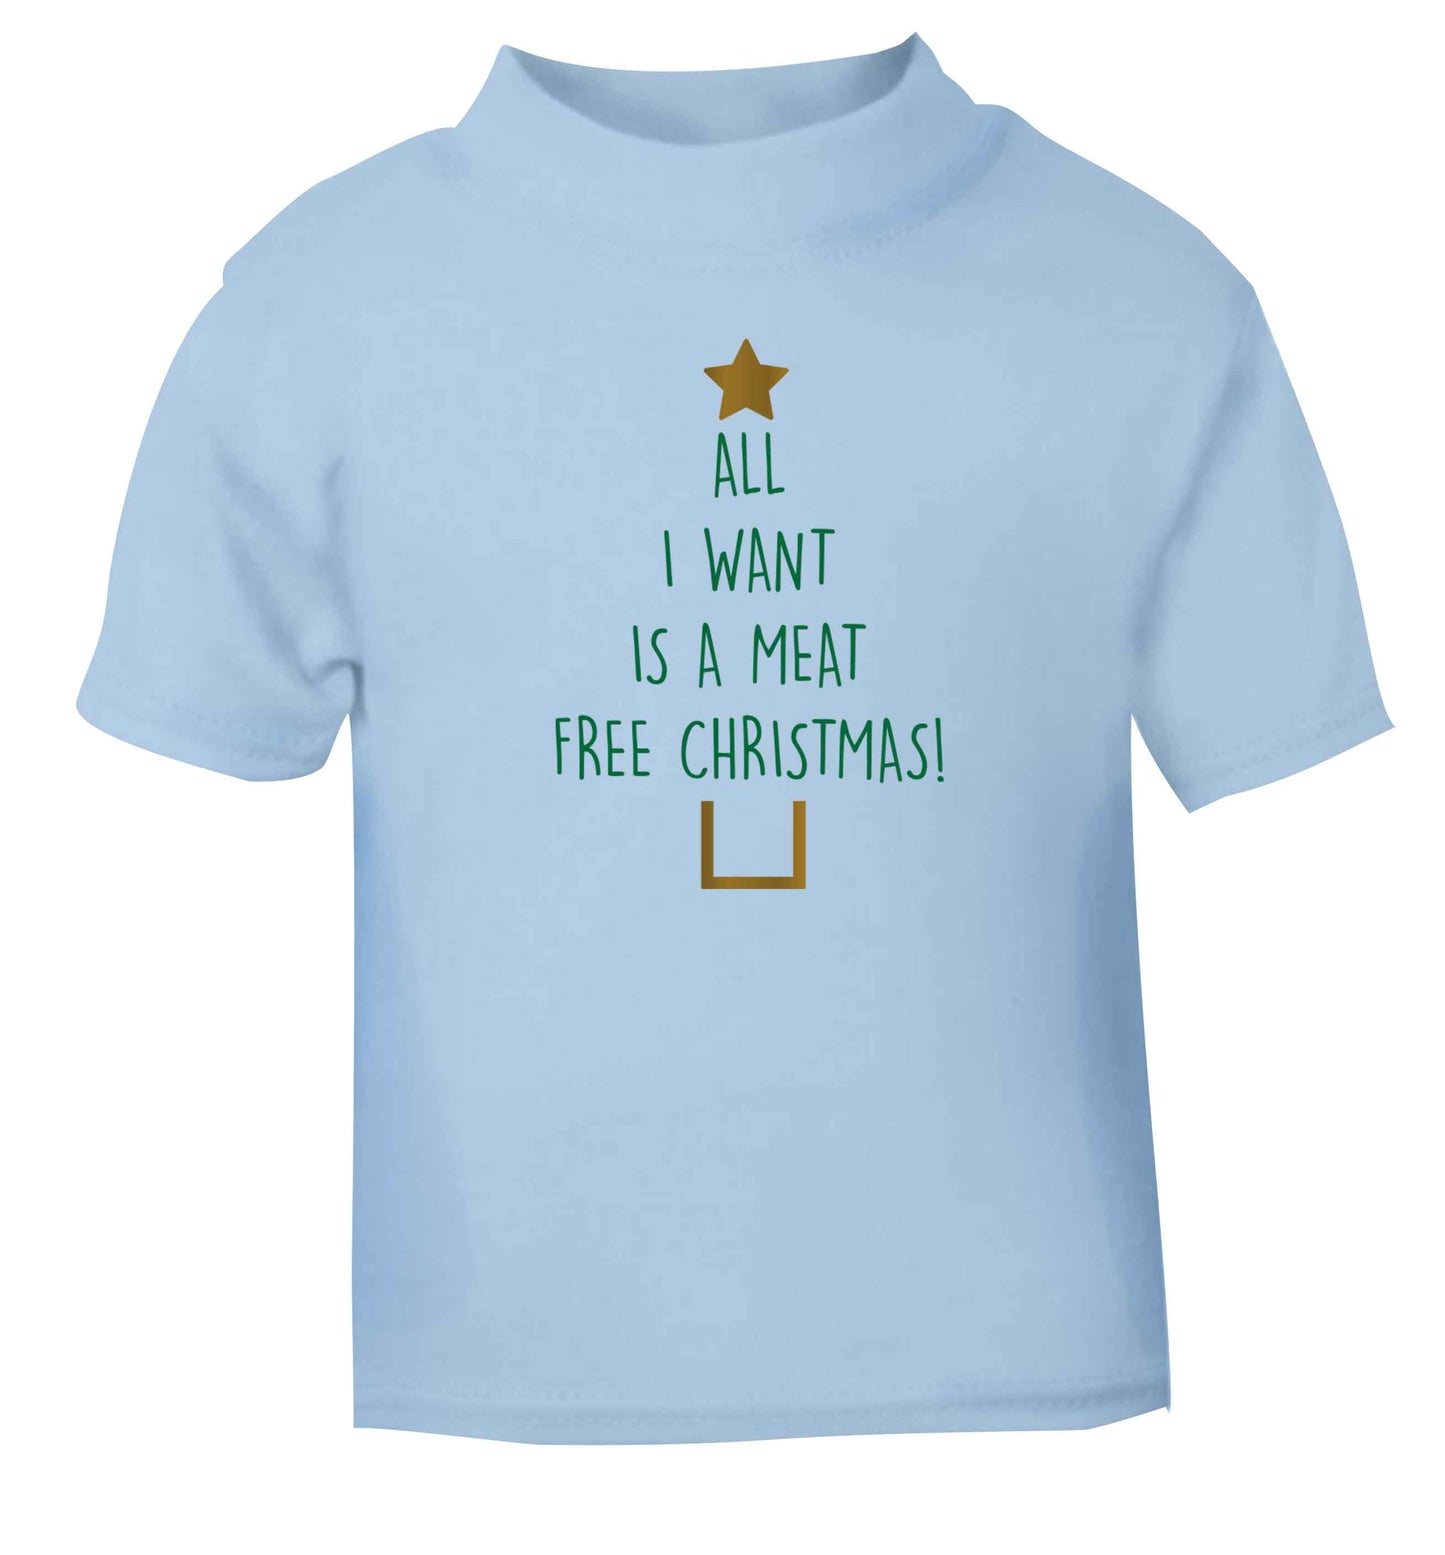 All I want is a meat free Christmas light blue Baby Toddler Tshirt 2 Years